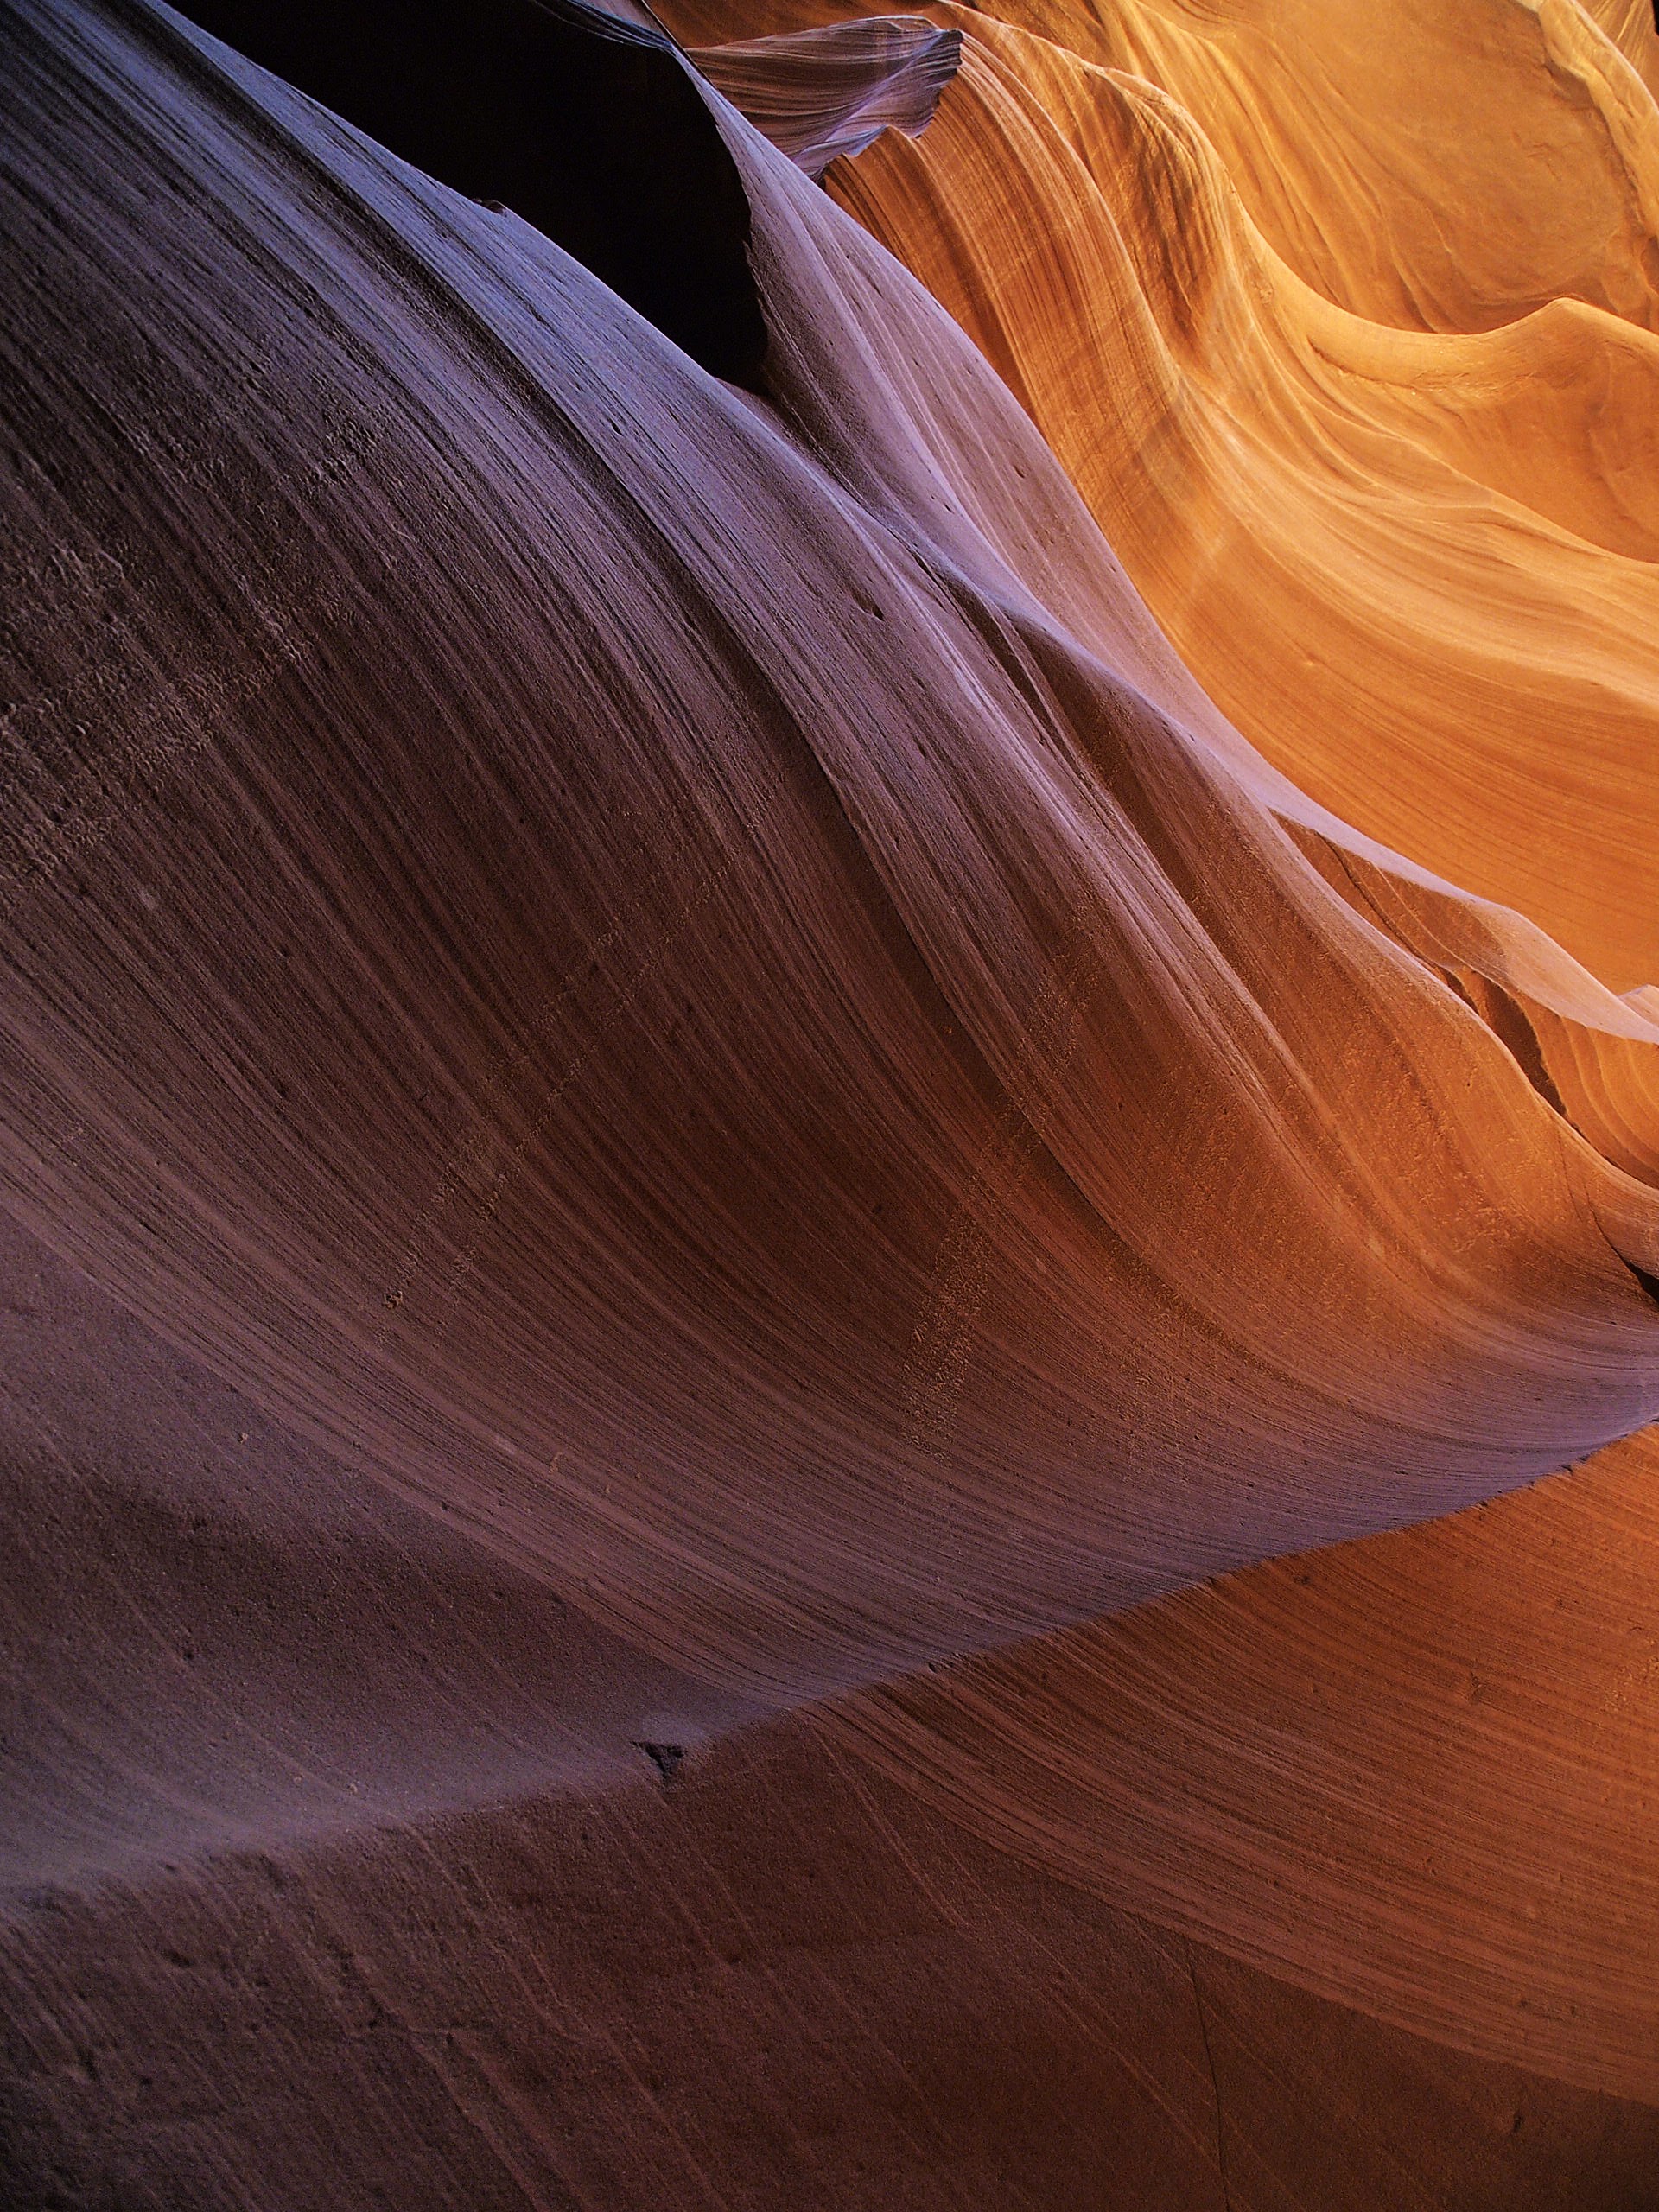 The rich colors of the Lower Antelope Canyon in the morning light